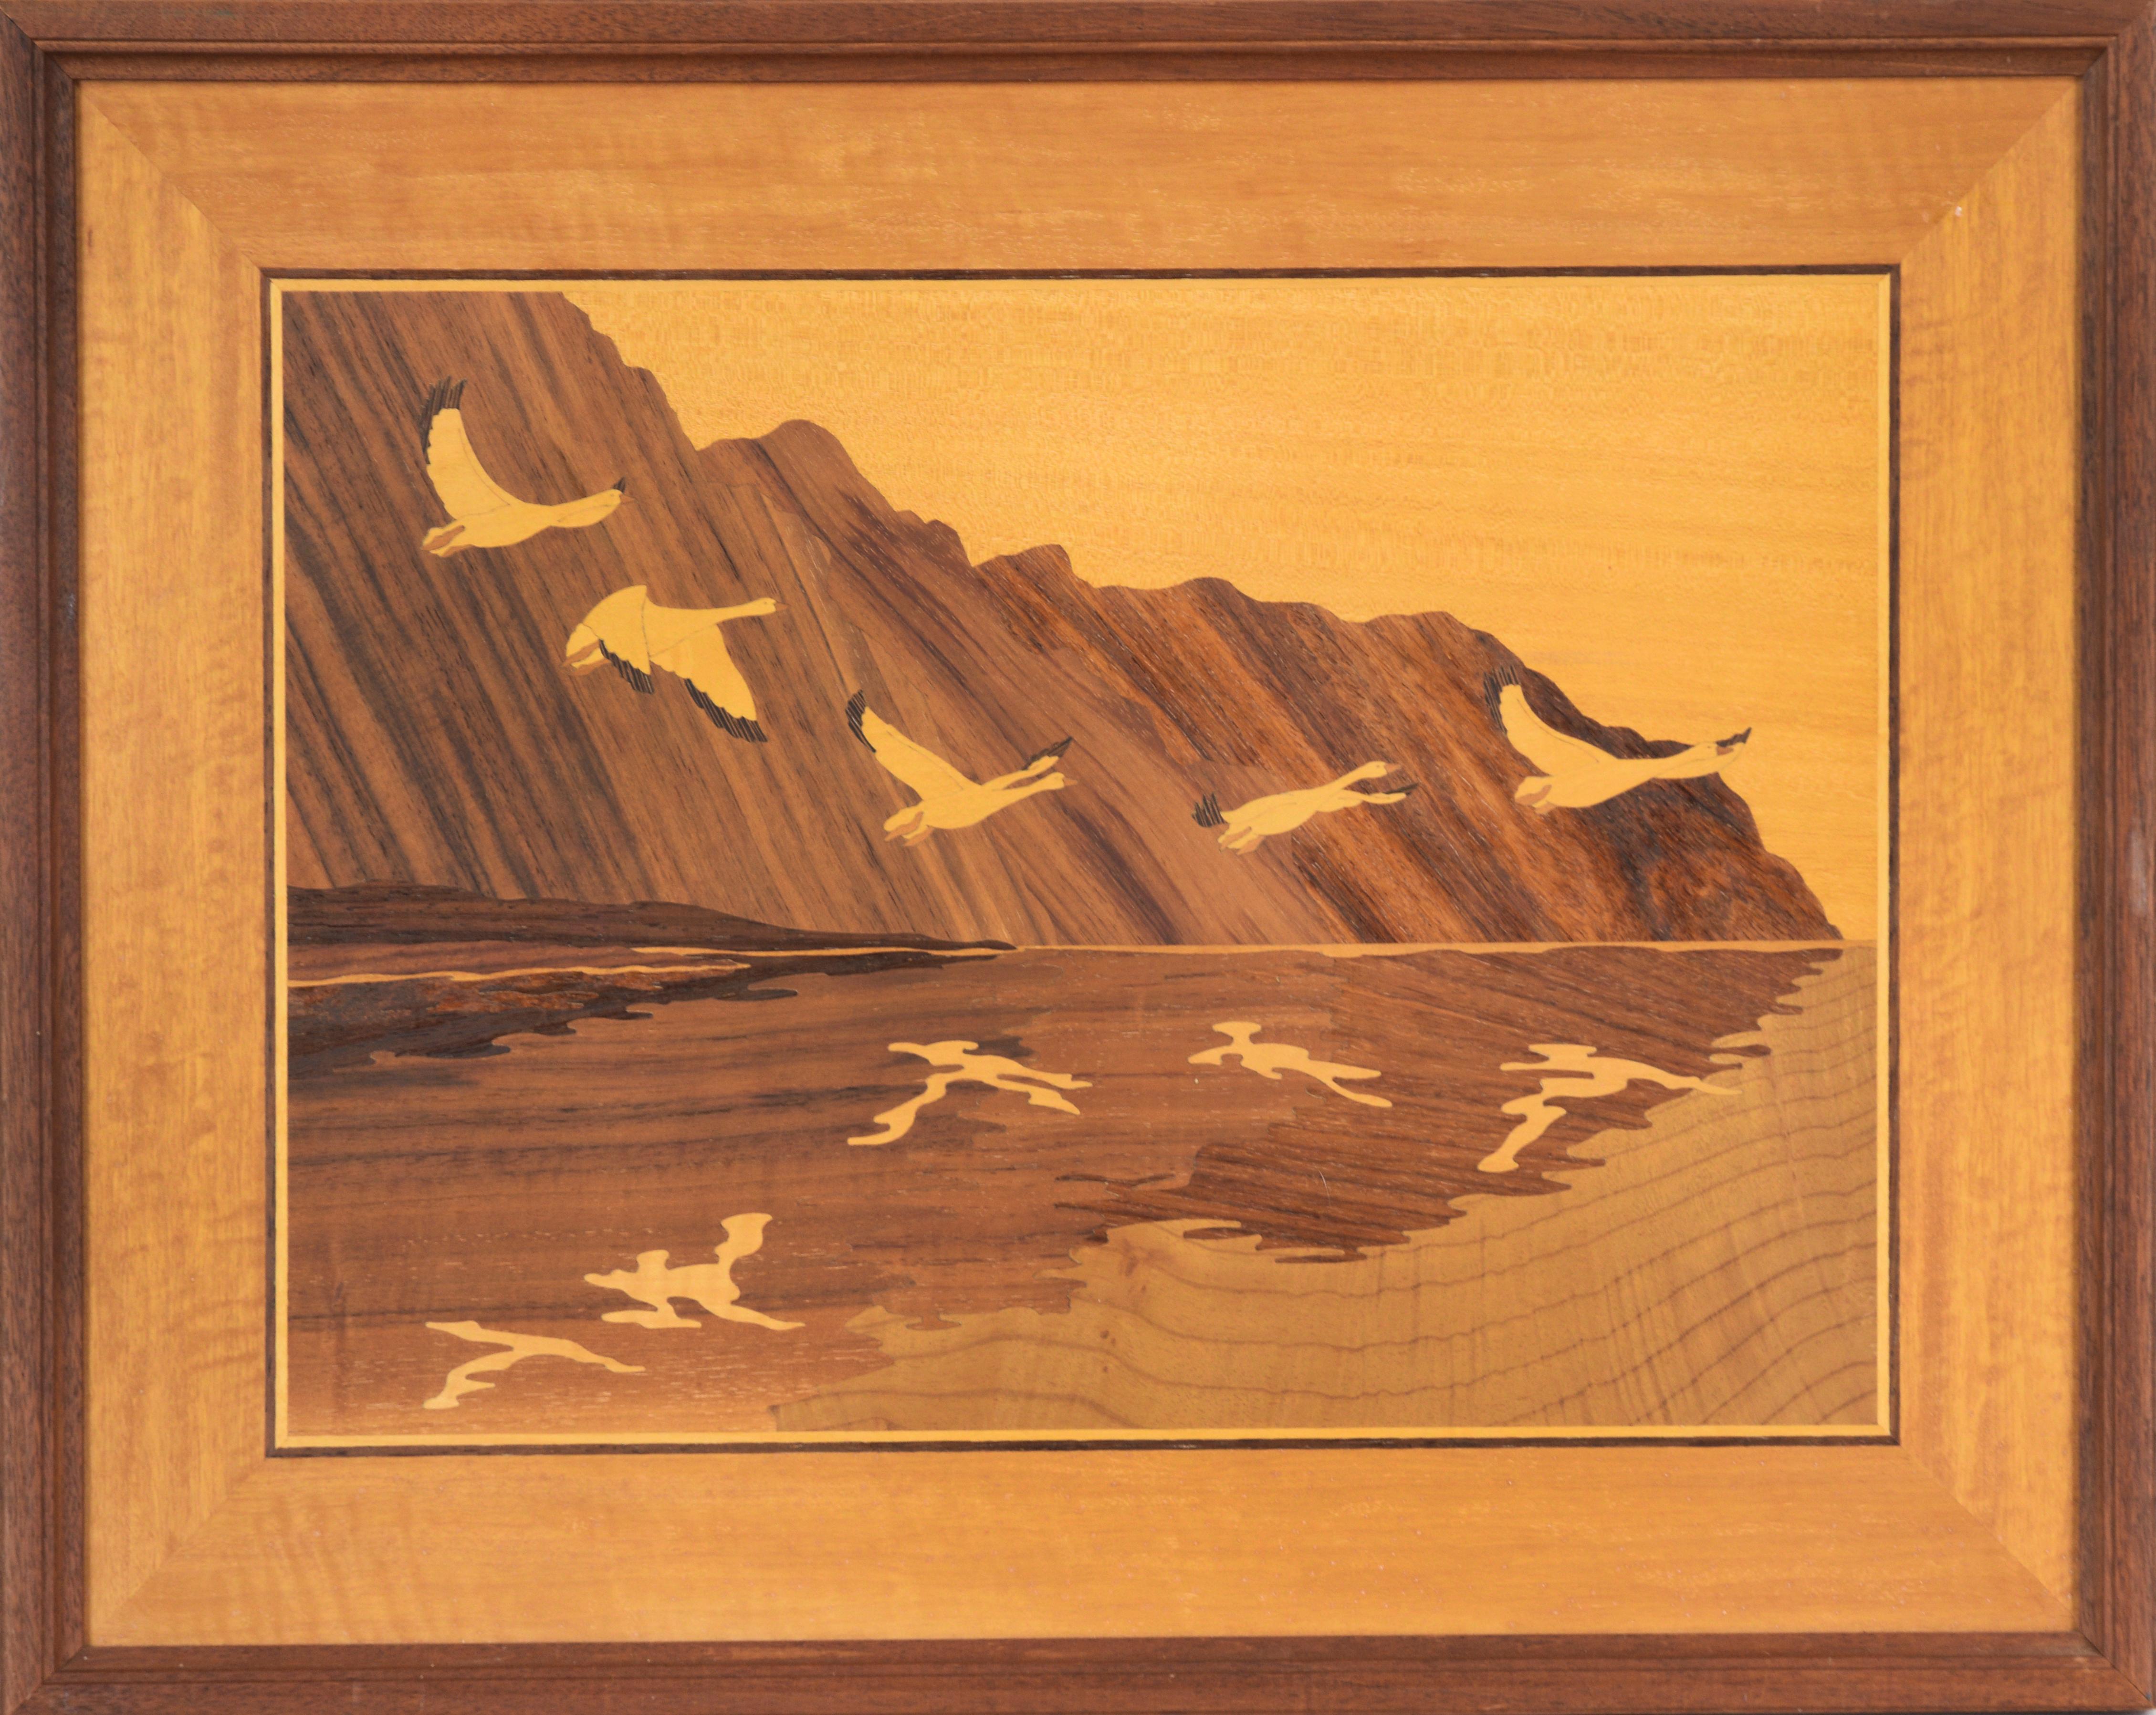 Hudson River Inlay Landscape Scene by Jeffrey Nelson
Hudson River Inlay Landscape Scene by Jeffrey Nelson (American, b. 1959-). Five Geese are seen flying over calm waters, their shadows appearing beneath them. Dark wood mountains are shown in the